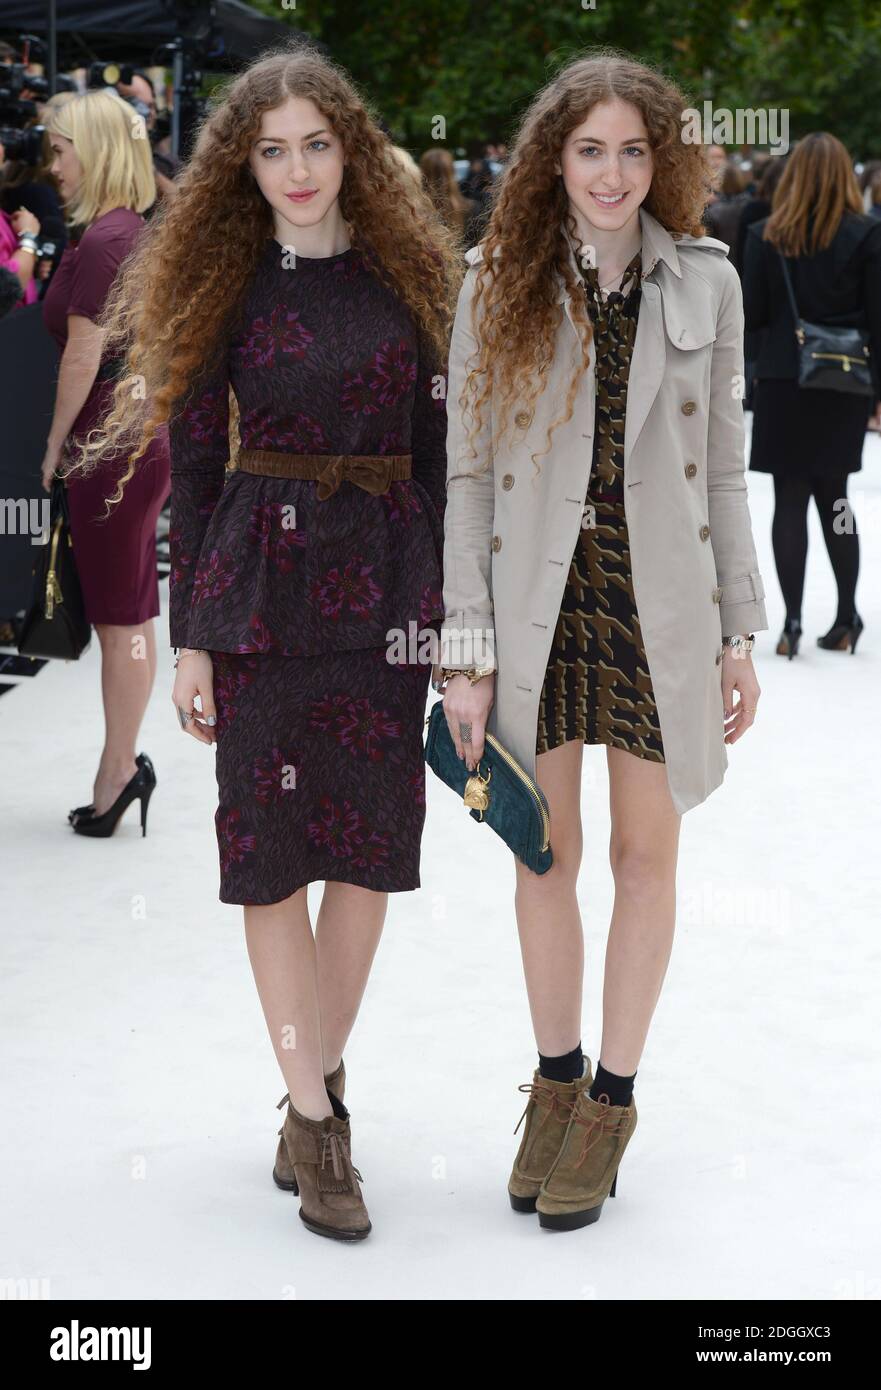 Models at the Burberry Prorsum Catwalk Show, Hyde Park. Part of London Fashion Week SS13, London. Stock Photo